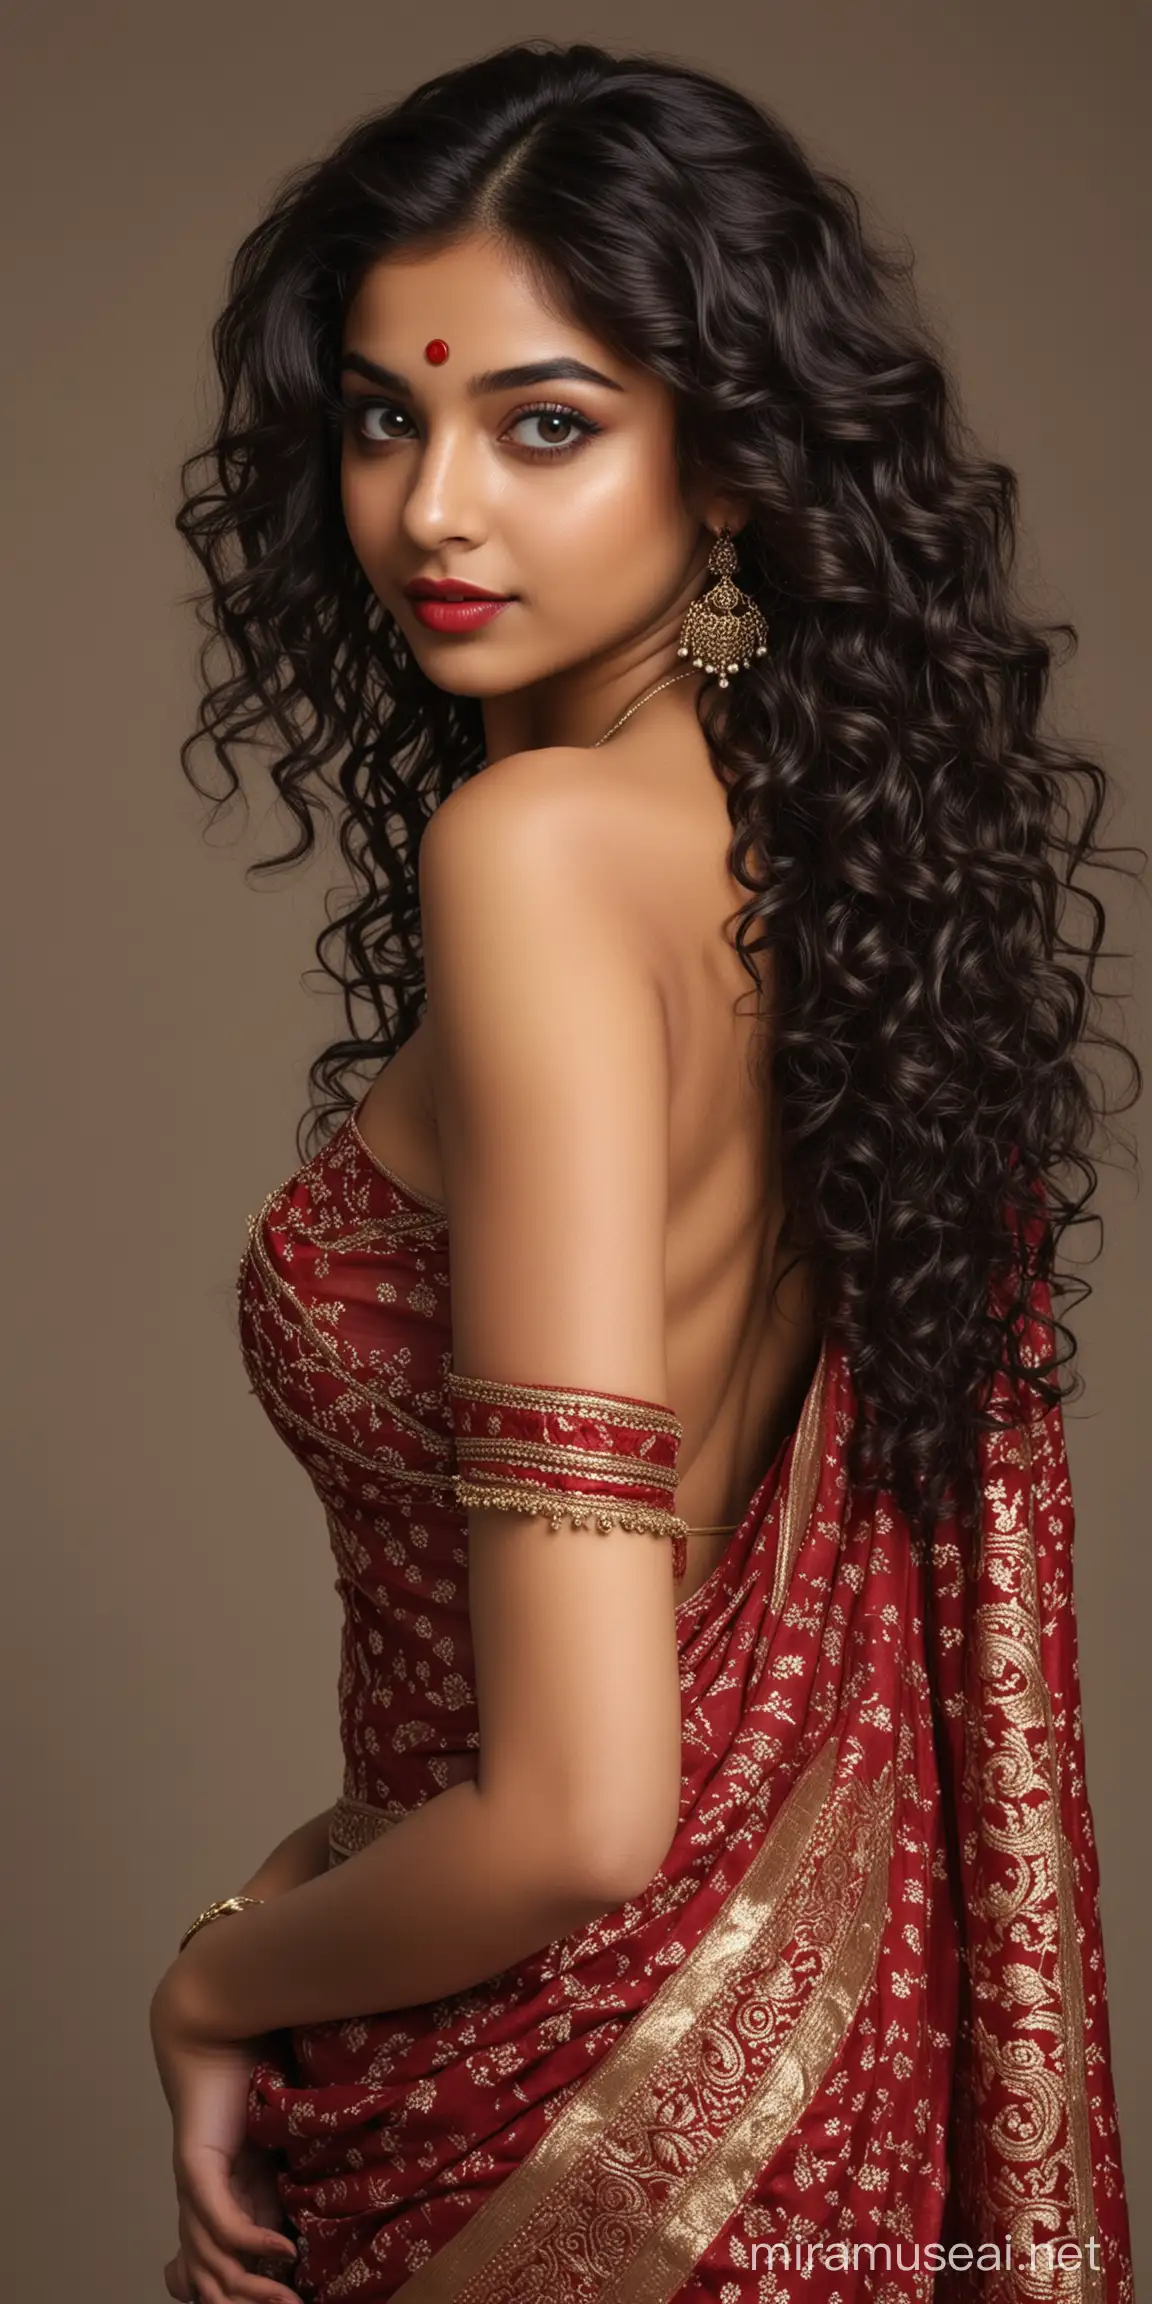 full body photo of most beautiful european girl as 16 year old beautiful indian girl, tuned away,  backless, big wide black eyes with eye makeup, thick long curly hair , wide big eyes, brows raised, turned away, perfect symmetric face and eyes, glossy dark red lipsticks, cut saree,   low cut back, intricate details, photo realistic, 4k.